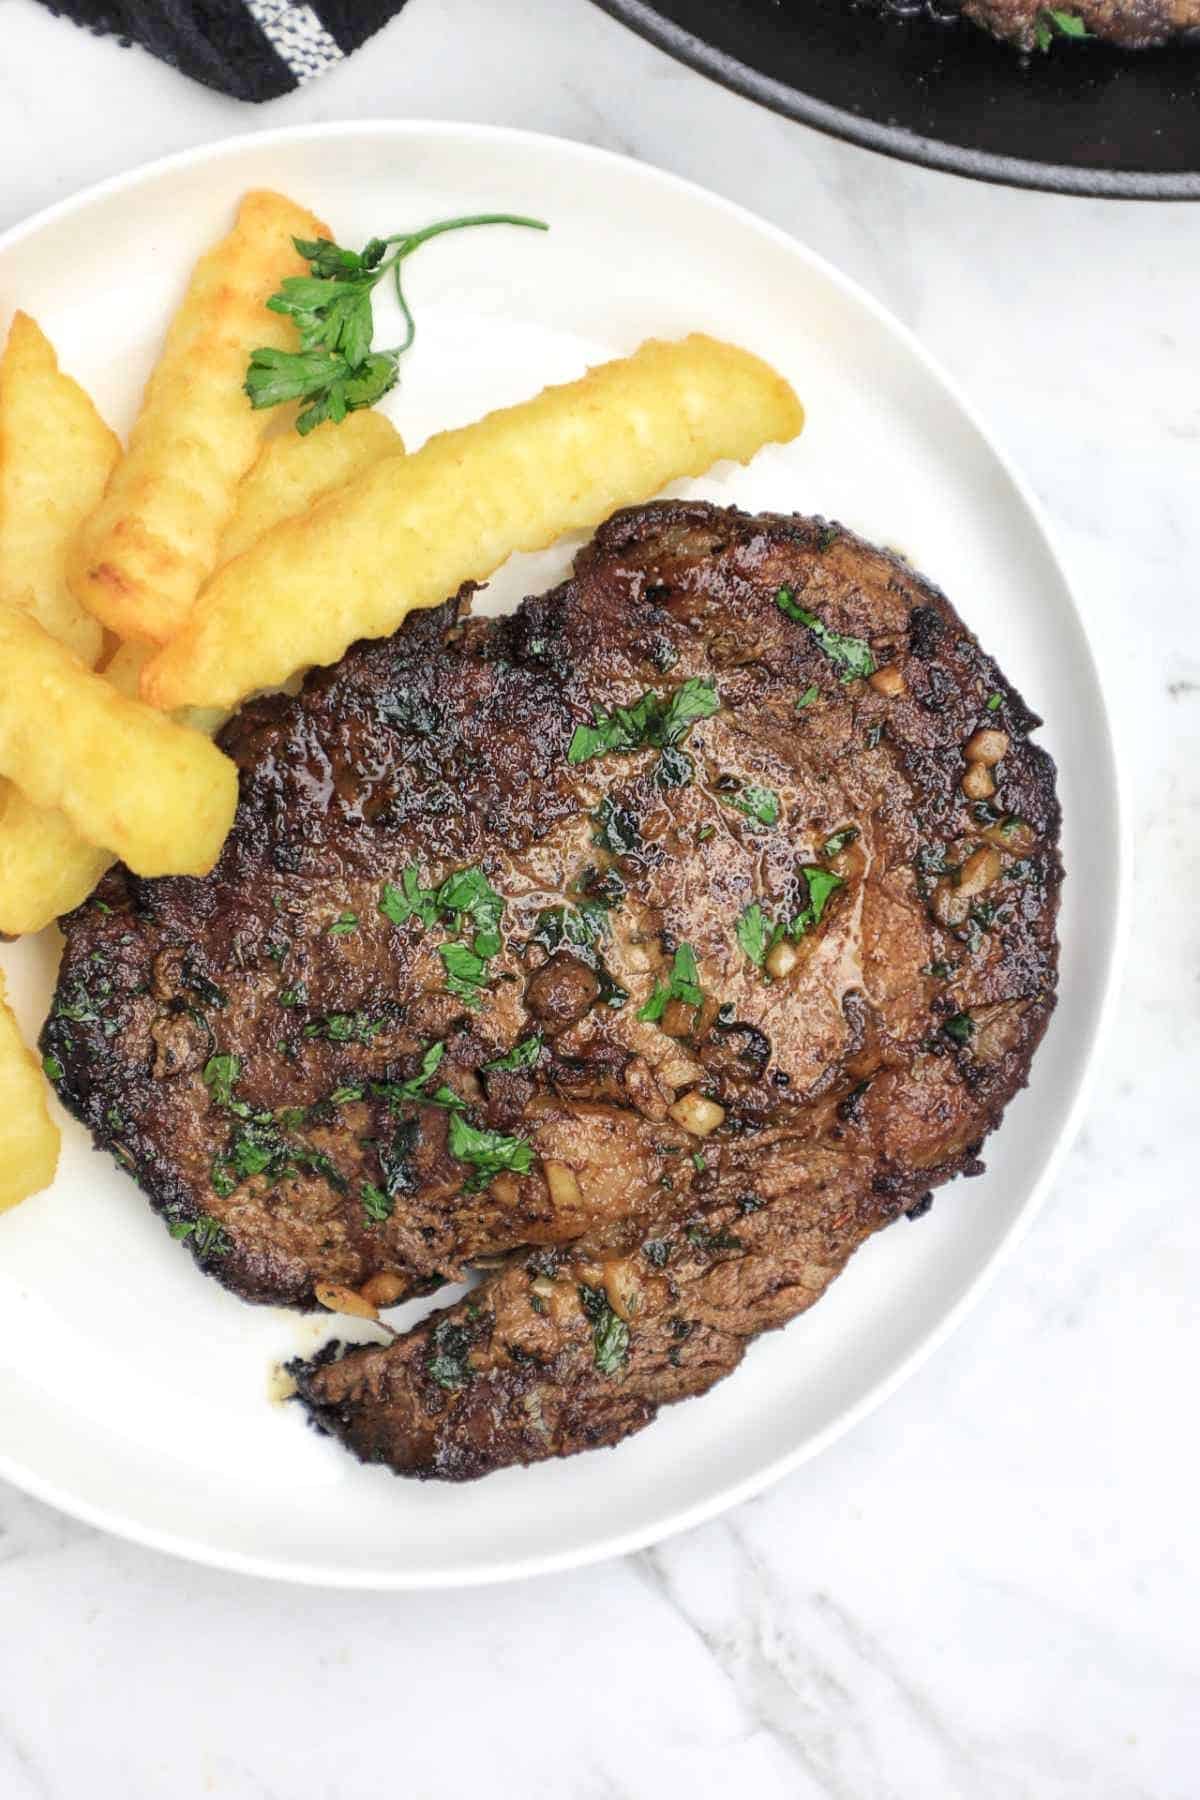 Pan fried steak served with fries and garnished with parsley.